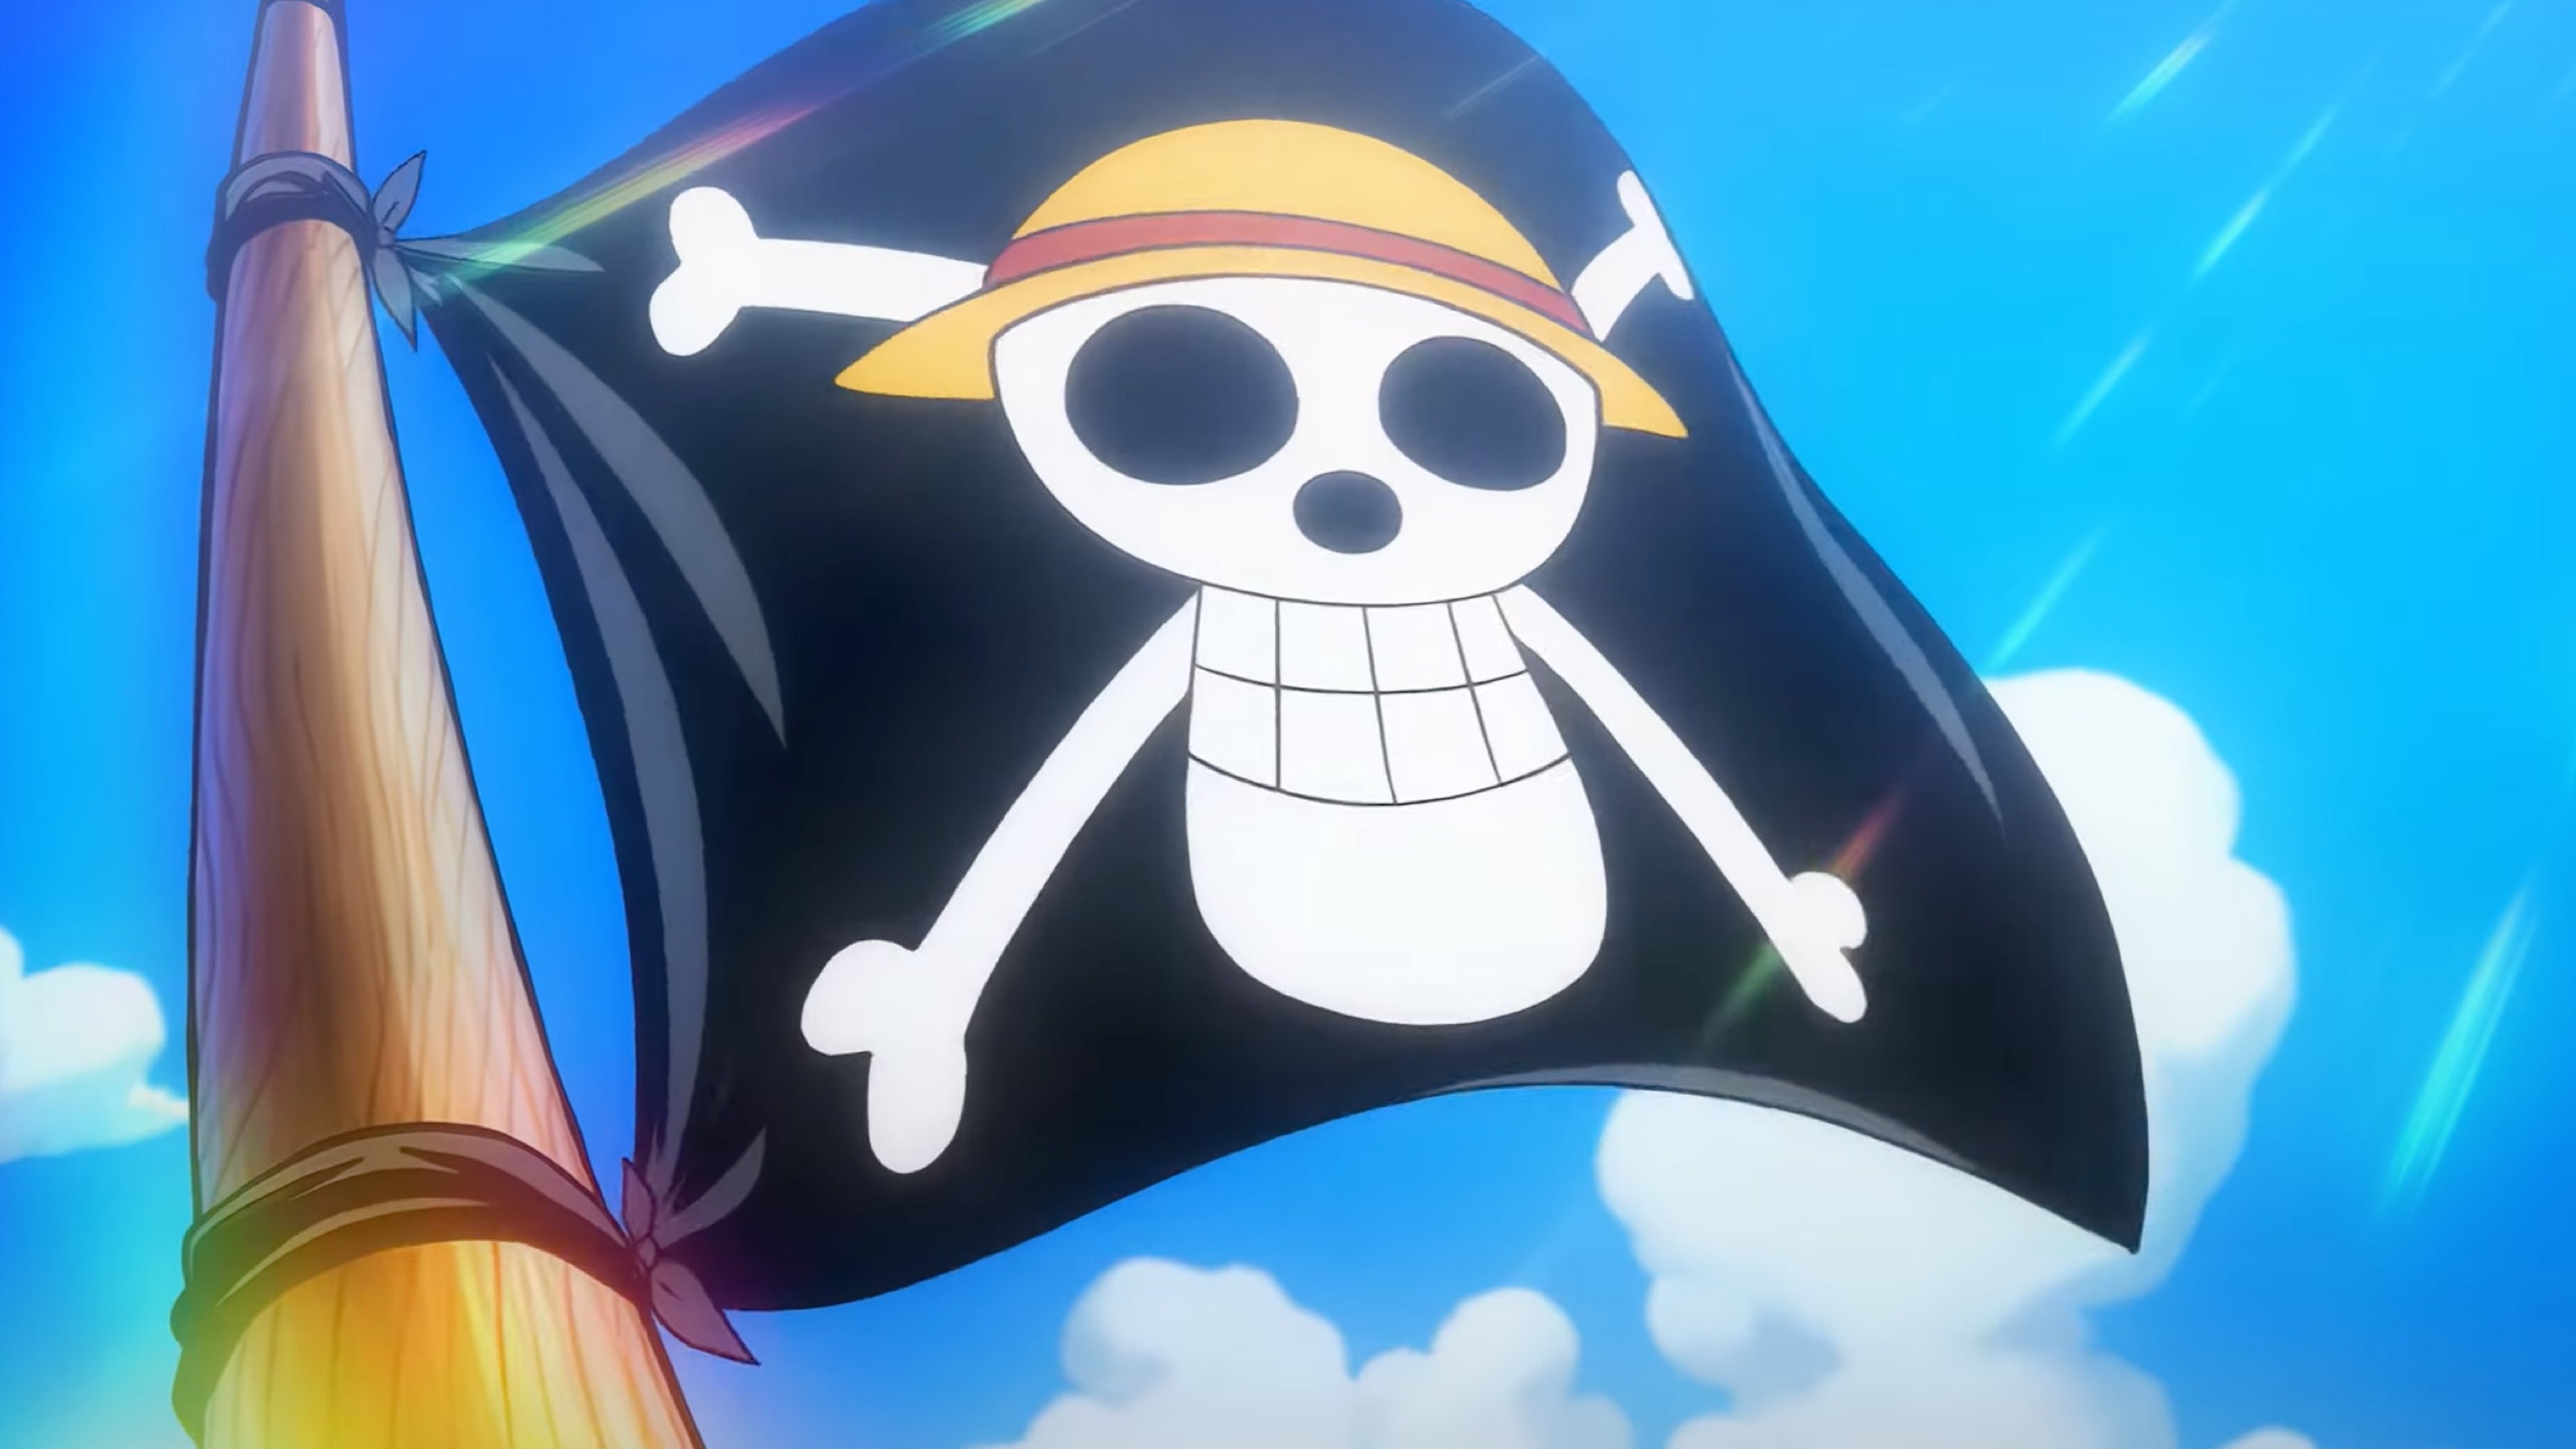 The Live Action One Piece Sets Sail In This Behind Scenes Video